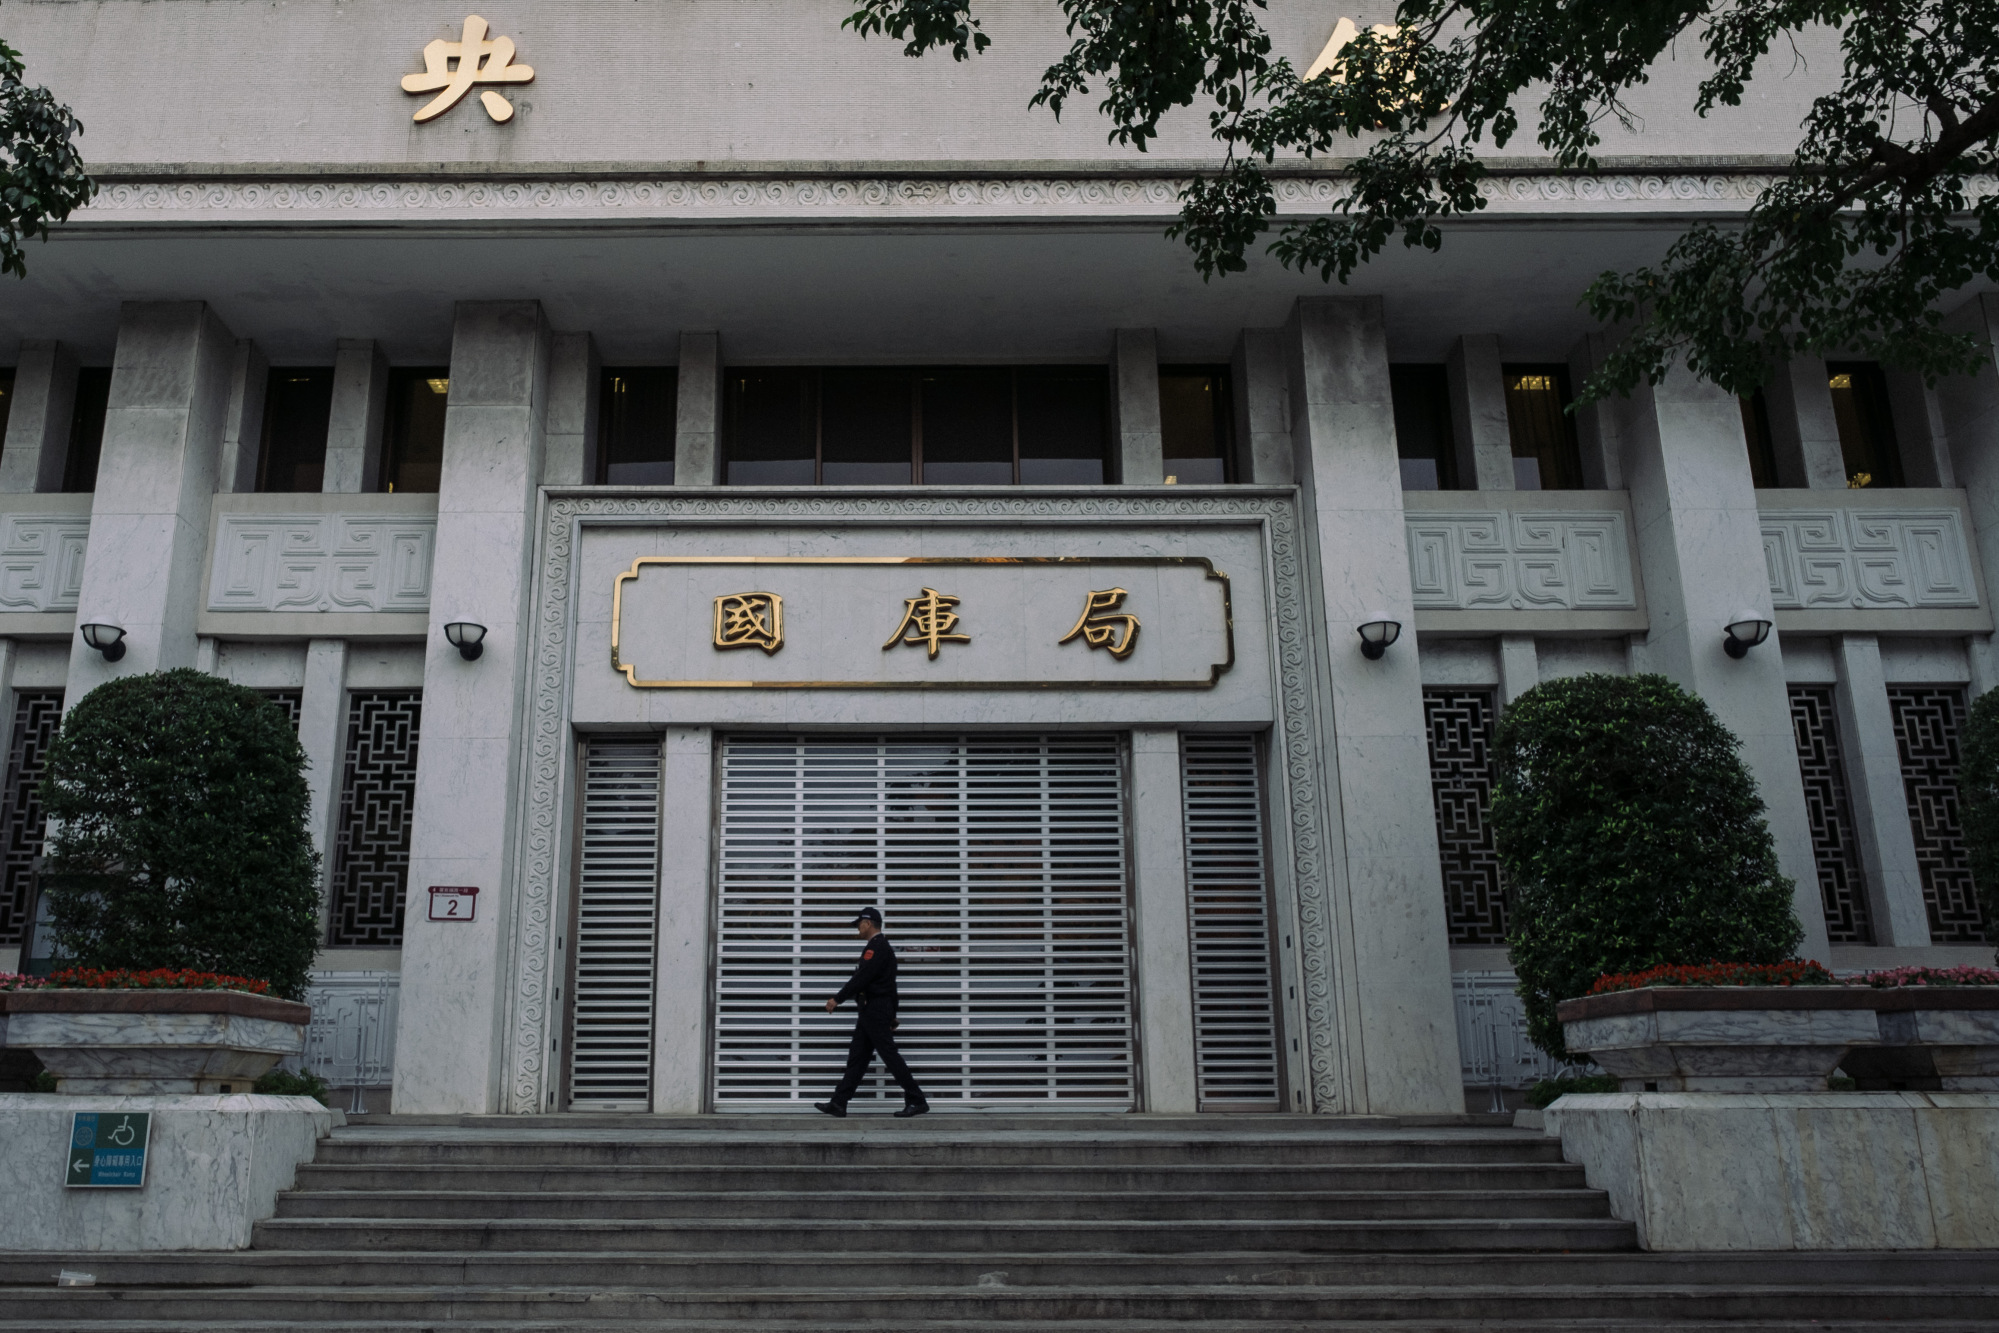 A security officer walks past signage for Department of the Treasury displayed at the Taiwan Central Bank headquarters building in Taipei, Taiwan, on Monday, Jan. 22, 2018. Taiwanese President Tsai Ing-wen favors choosing monetary policy maker Yang Chin-long to become the next chief of Taiwan's central bank, according to a person familiar with the matter.